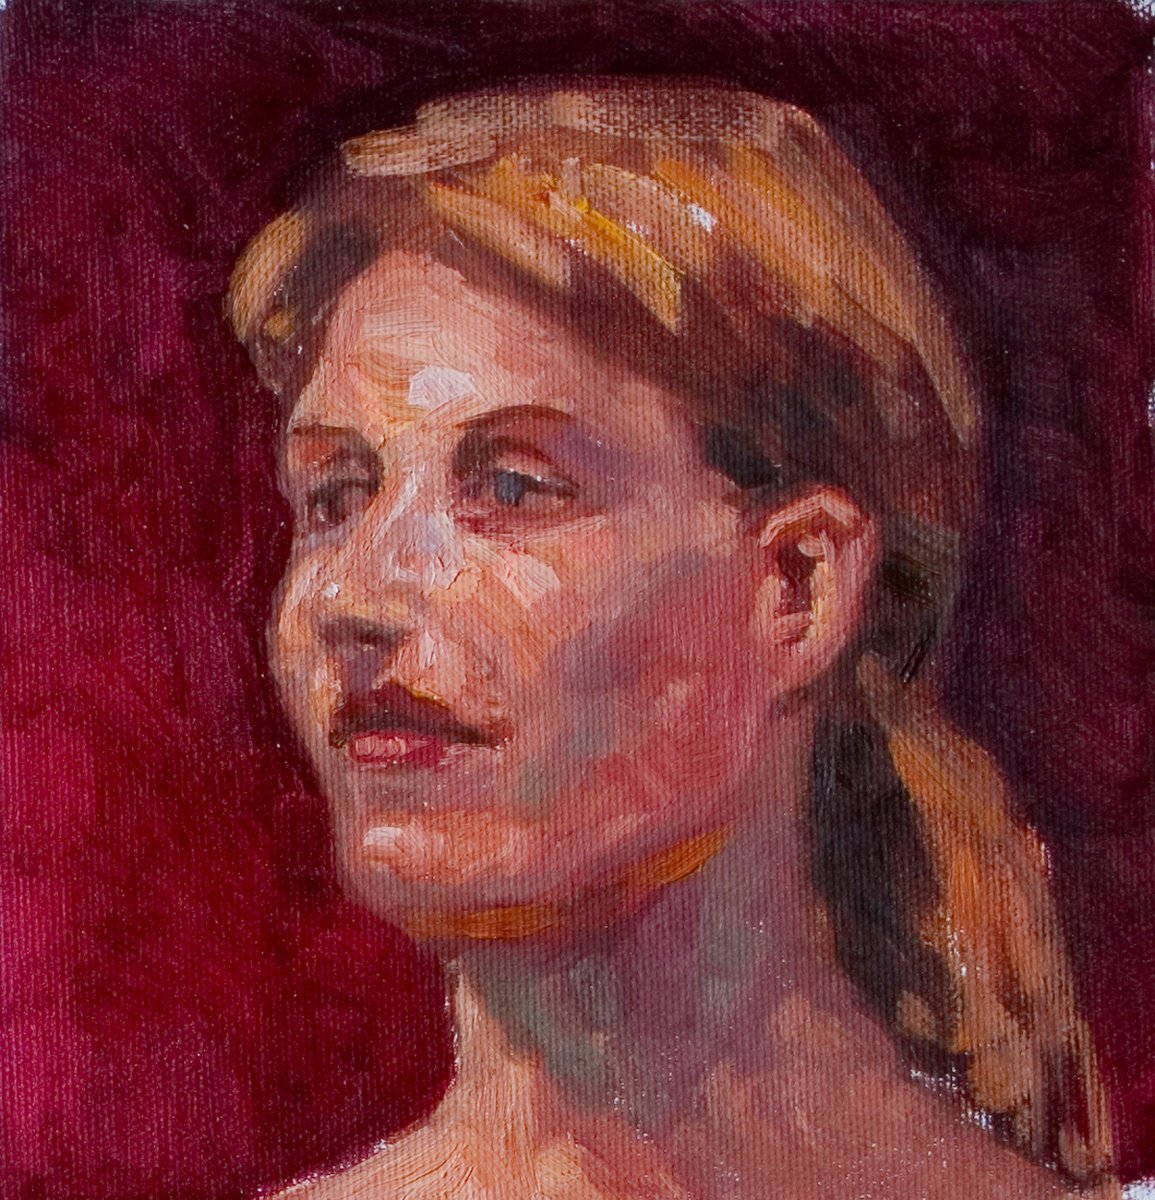 life model study of a blond woman by Olivier Payeur